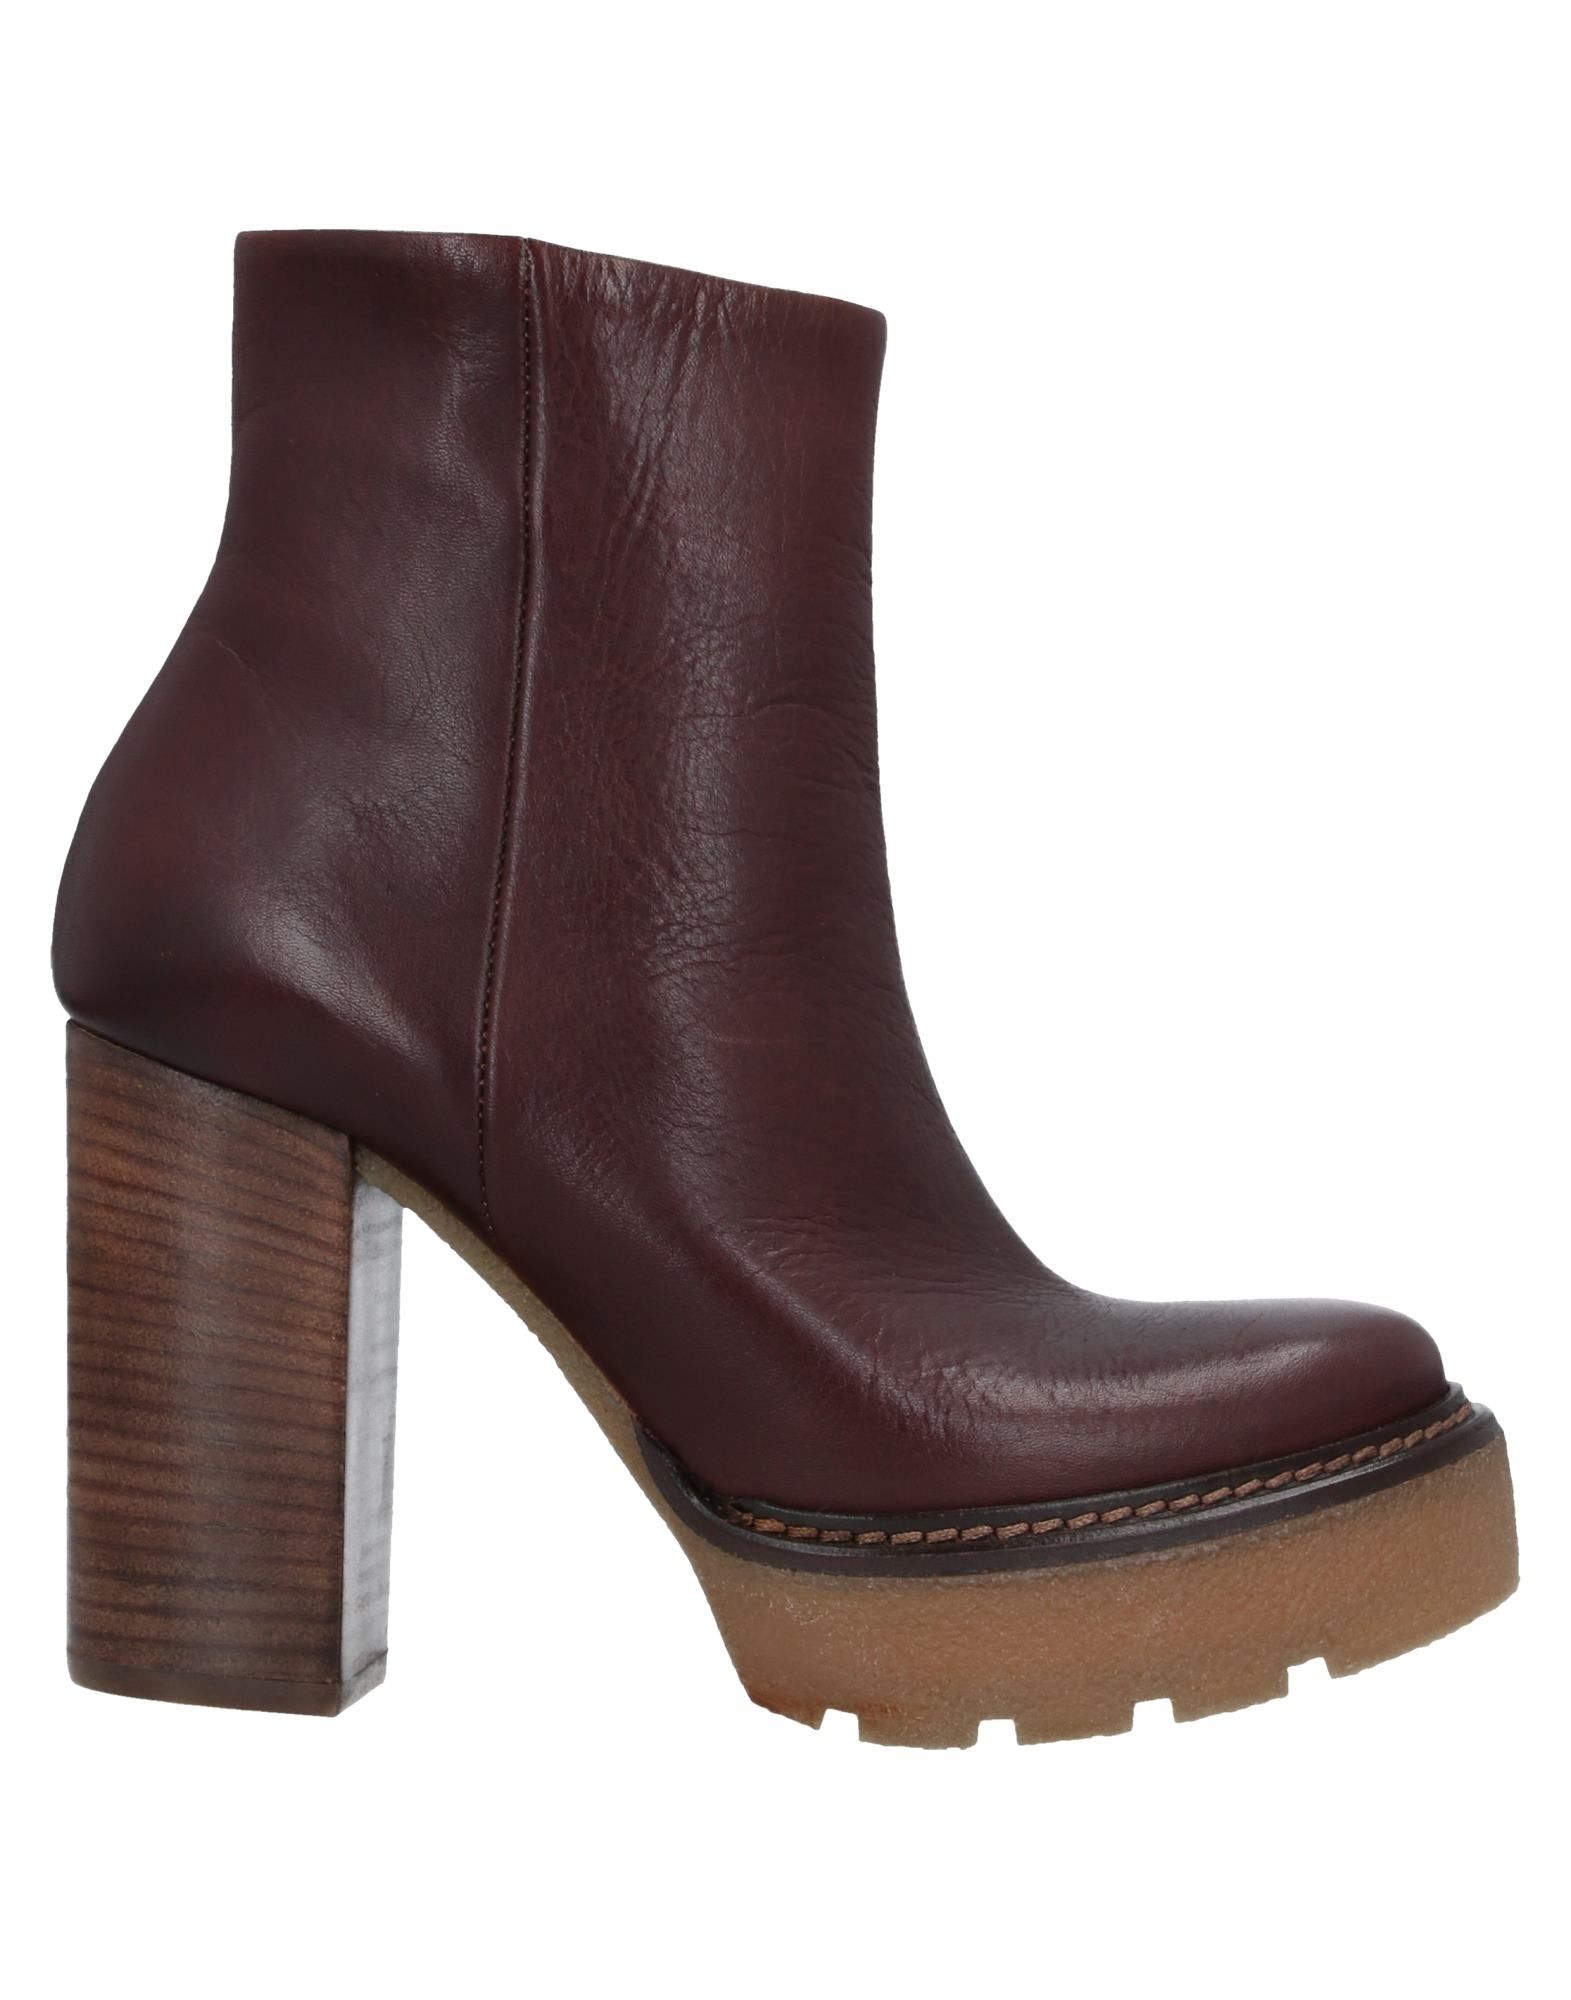 VIC MATIE Ankle boots - Item 11714101